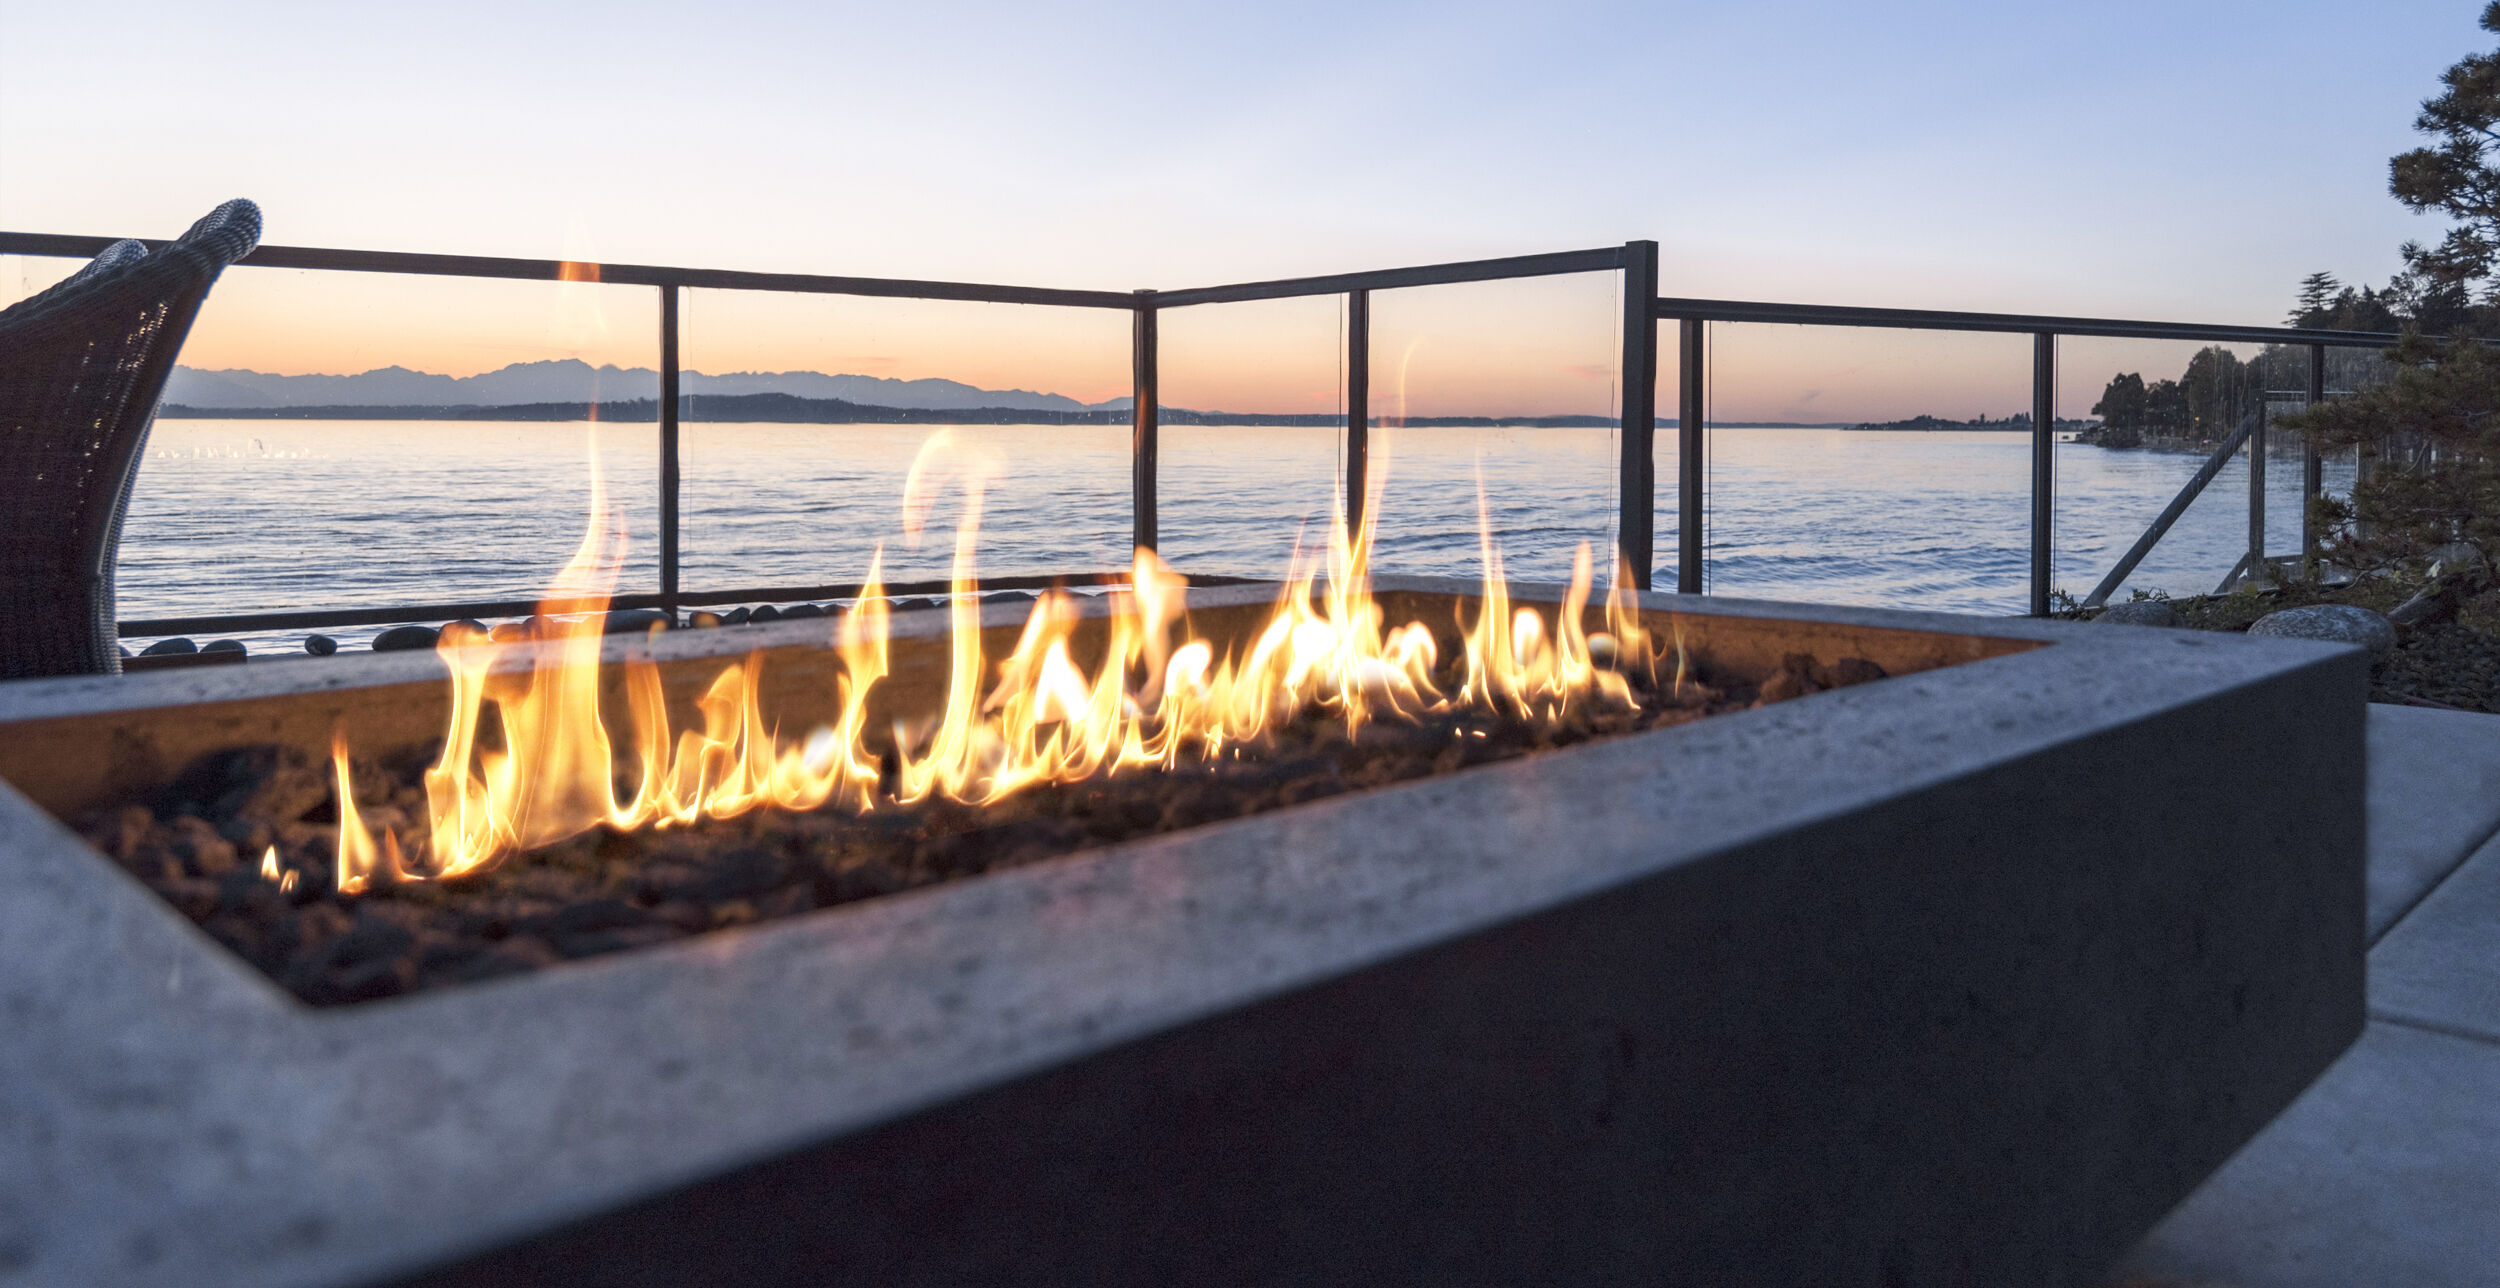 An outdoor patio at dusk with a large, linear gas fire pit and a lake view in the background.